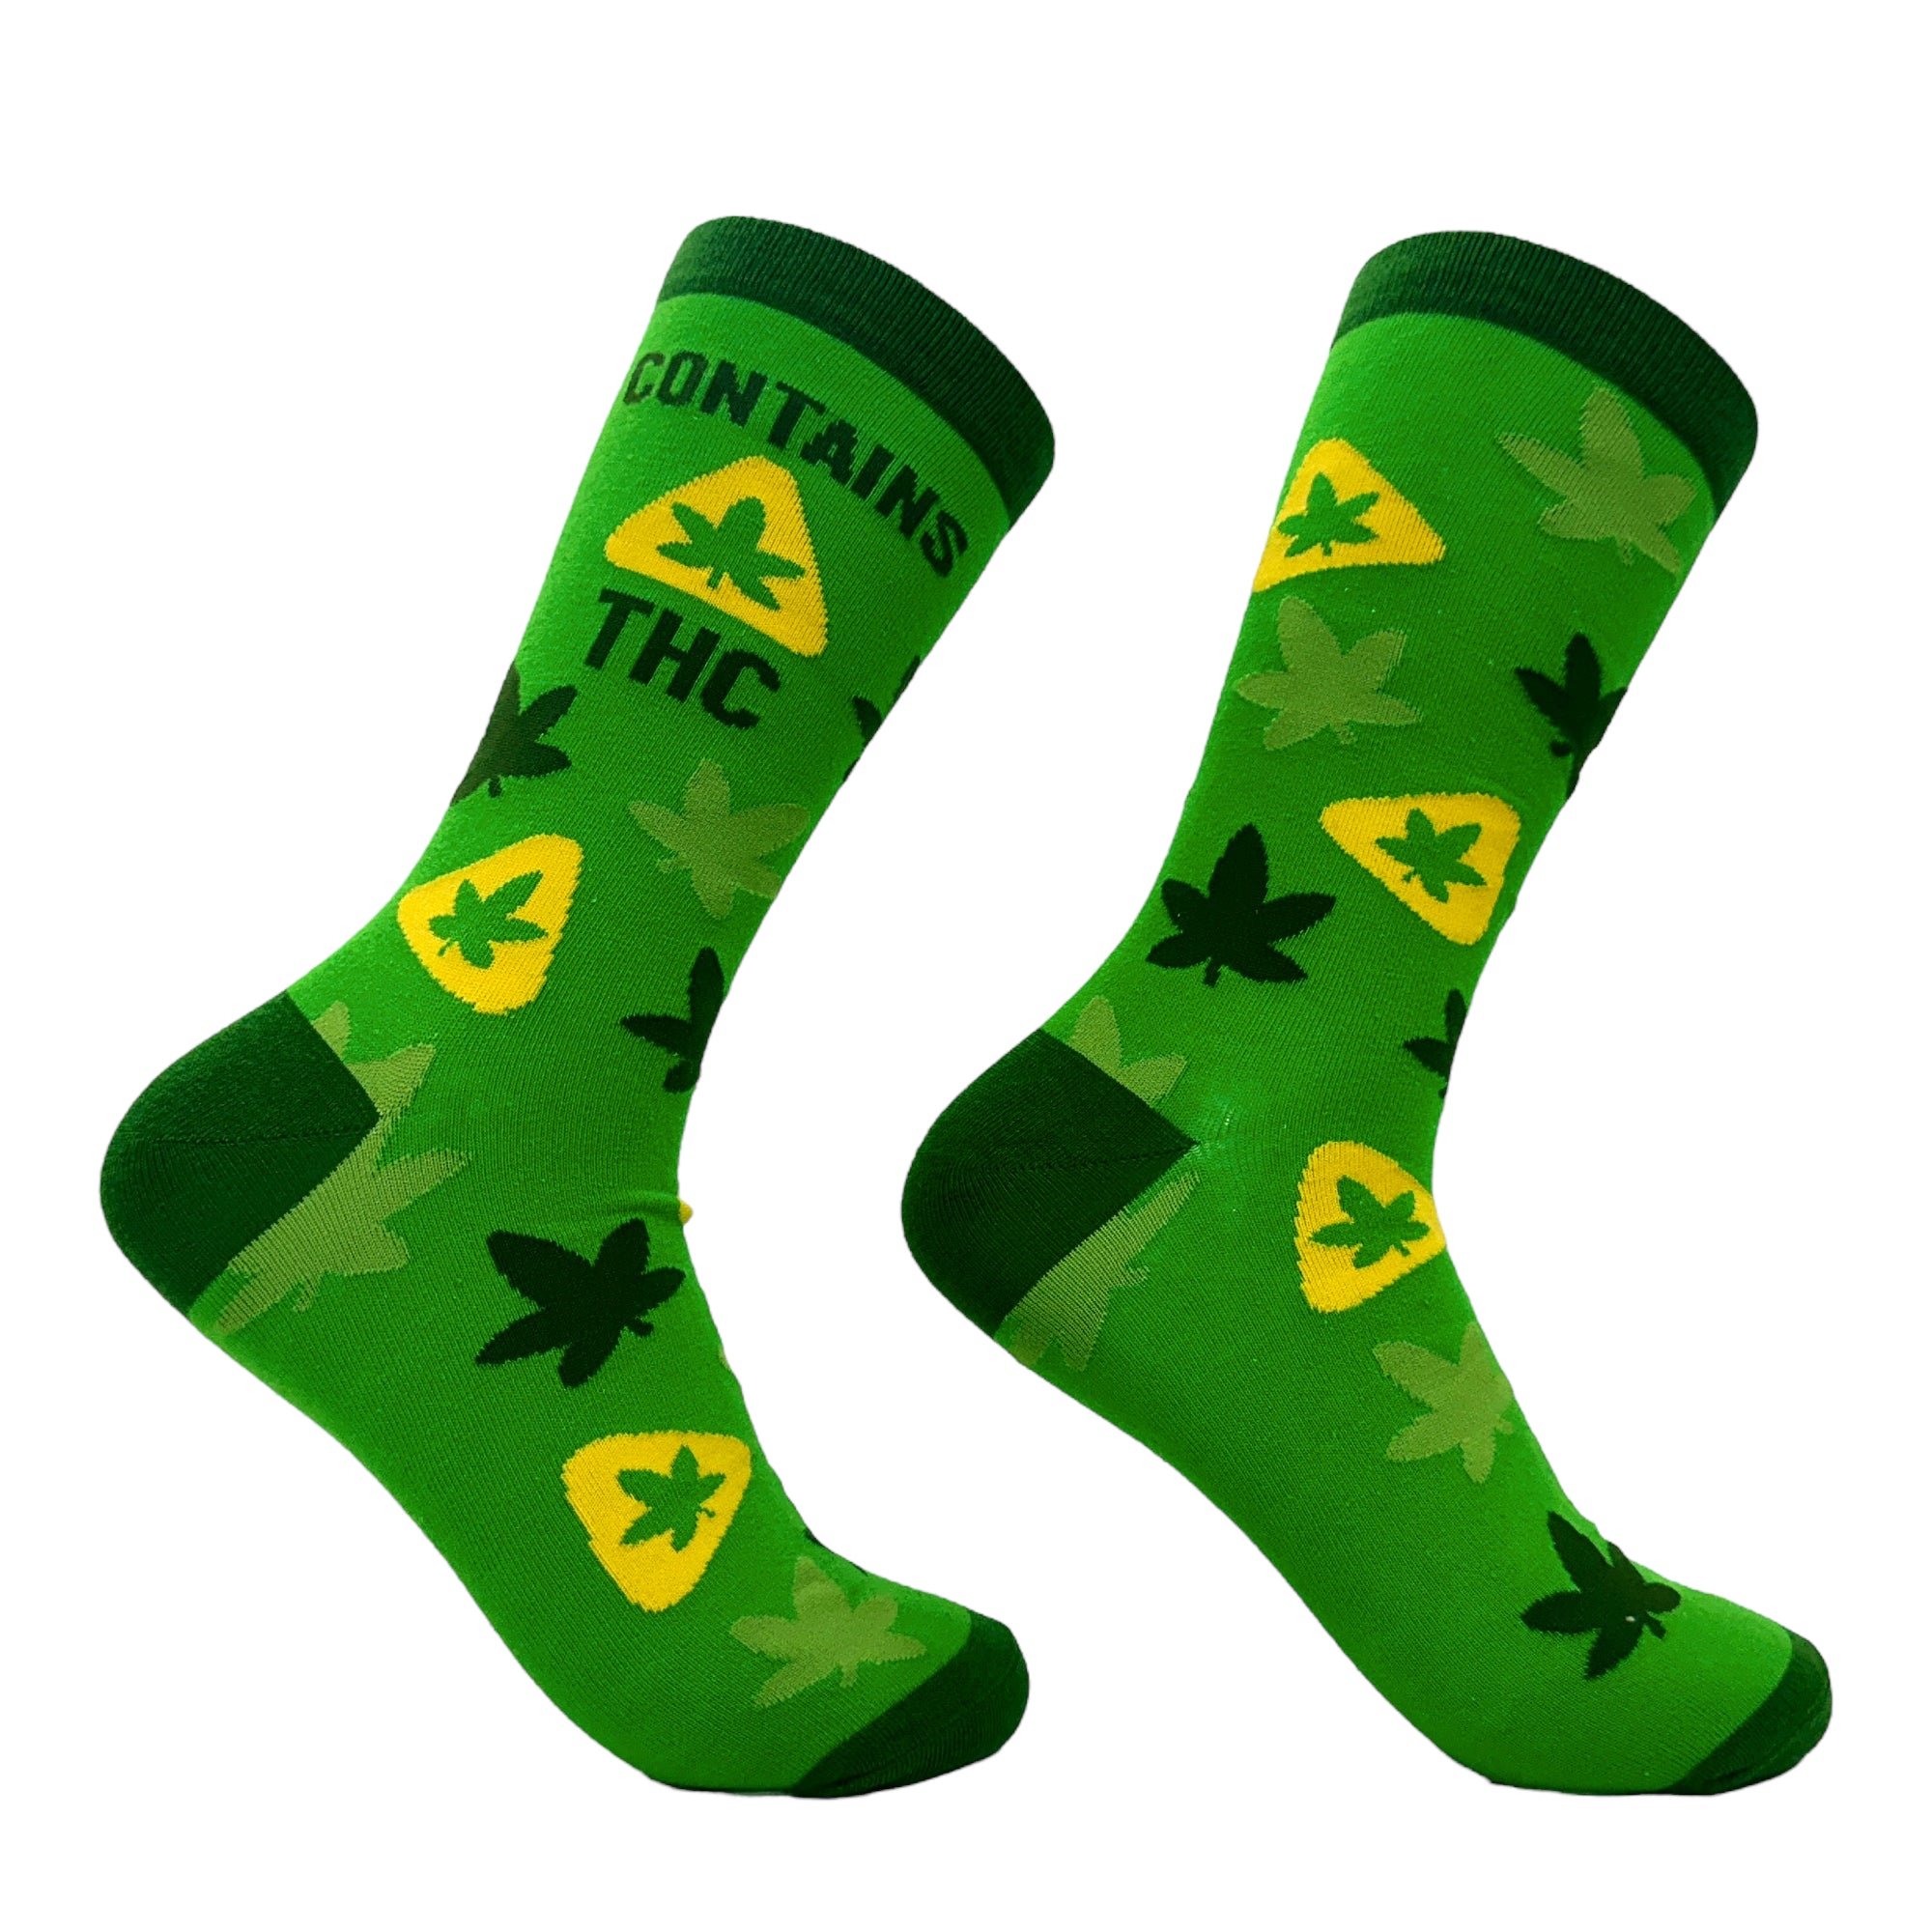 Funny Green - Contains THC Men's Contains THC Sock Nerdy 420 Sarcastic Tee